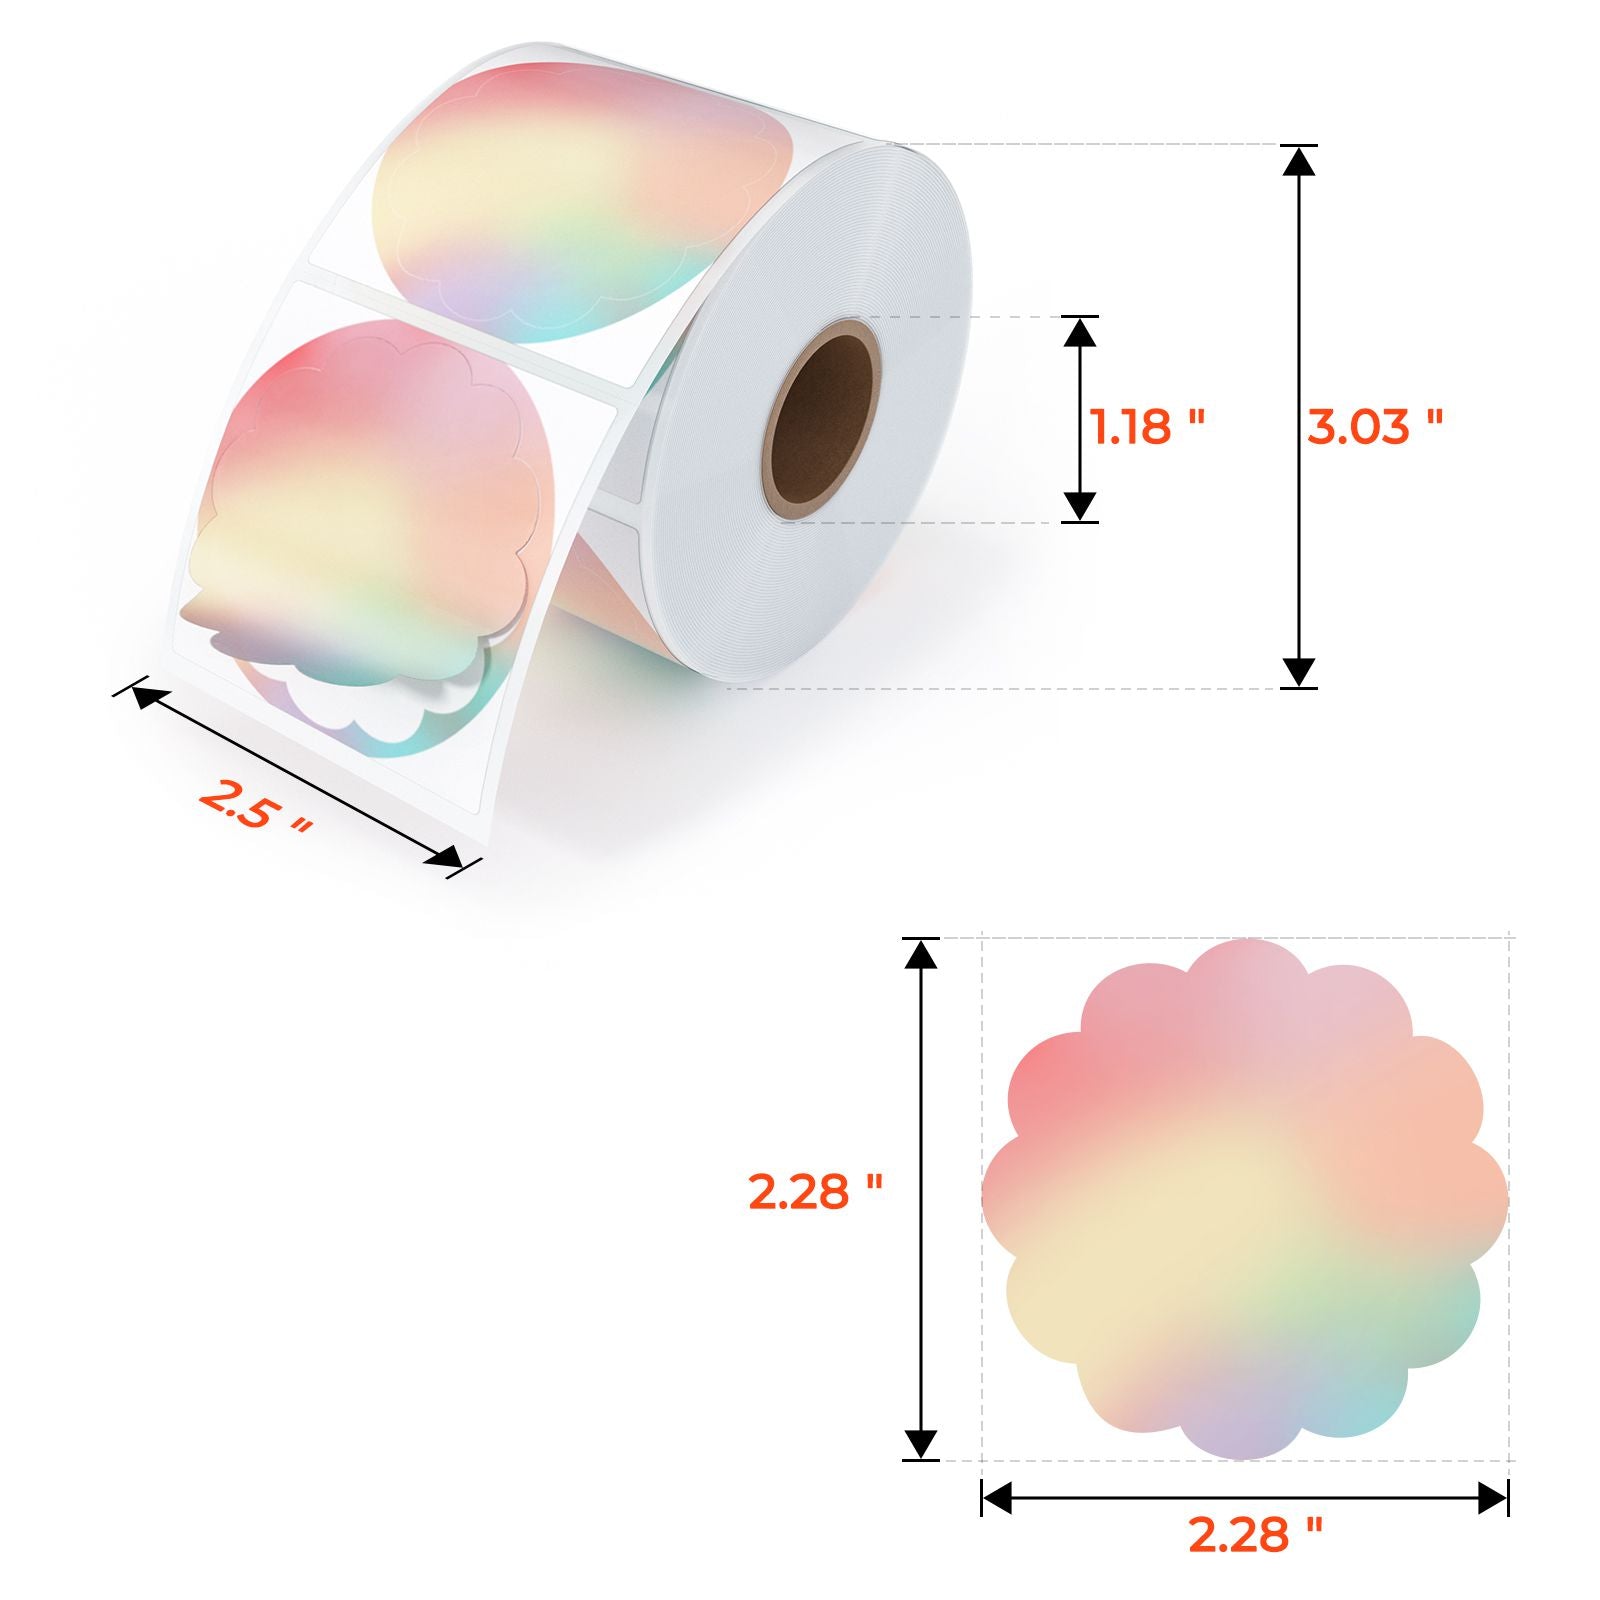 MUNBYN personalized 58mm direct thermal floral sticker labels can be used as custom labels.